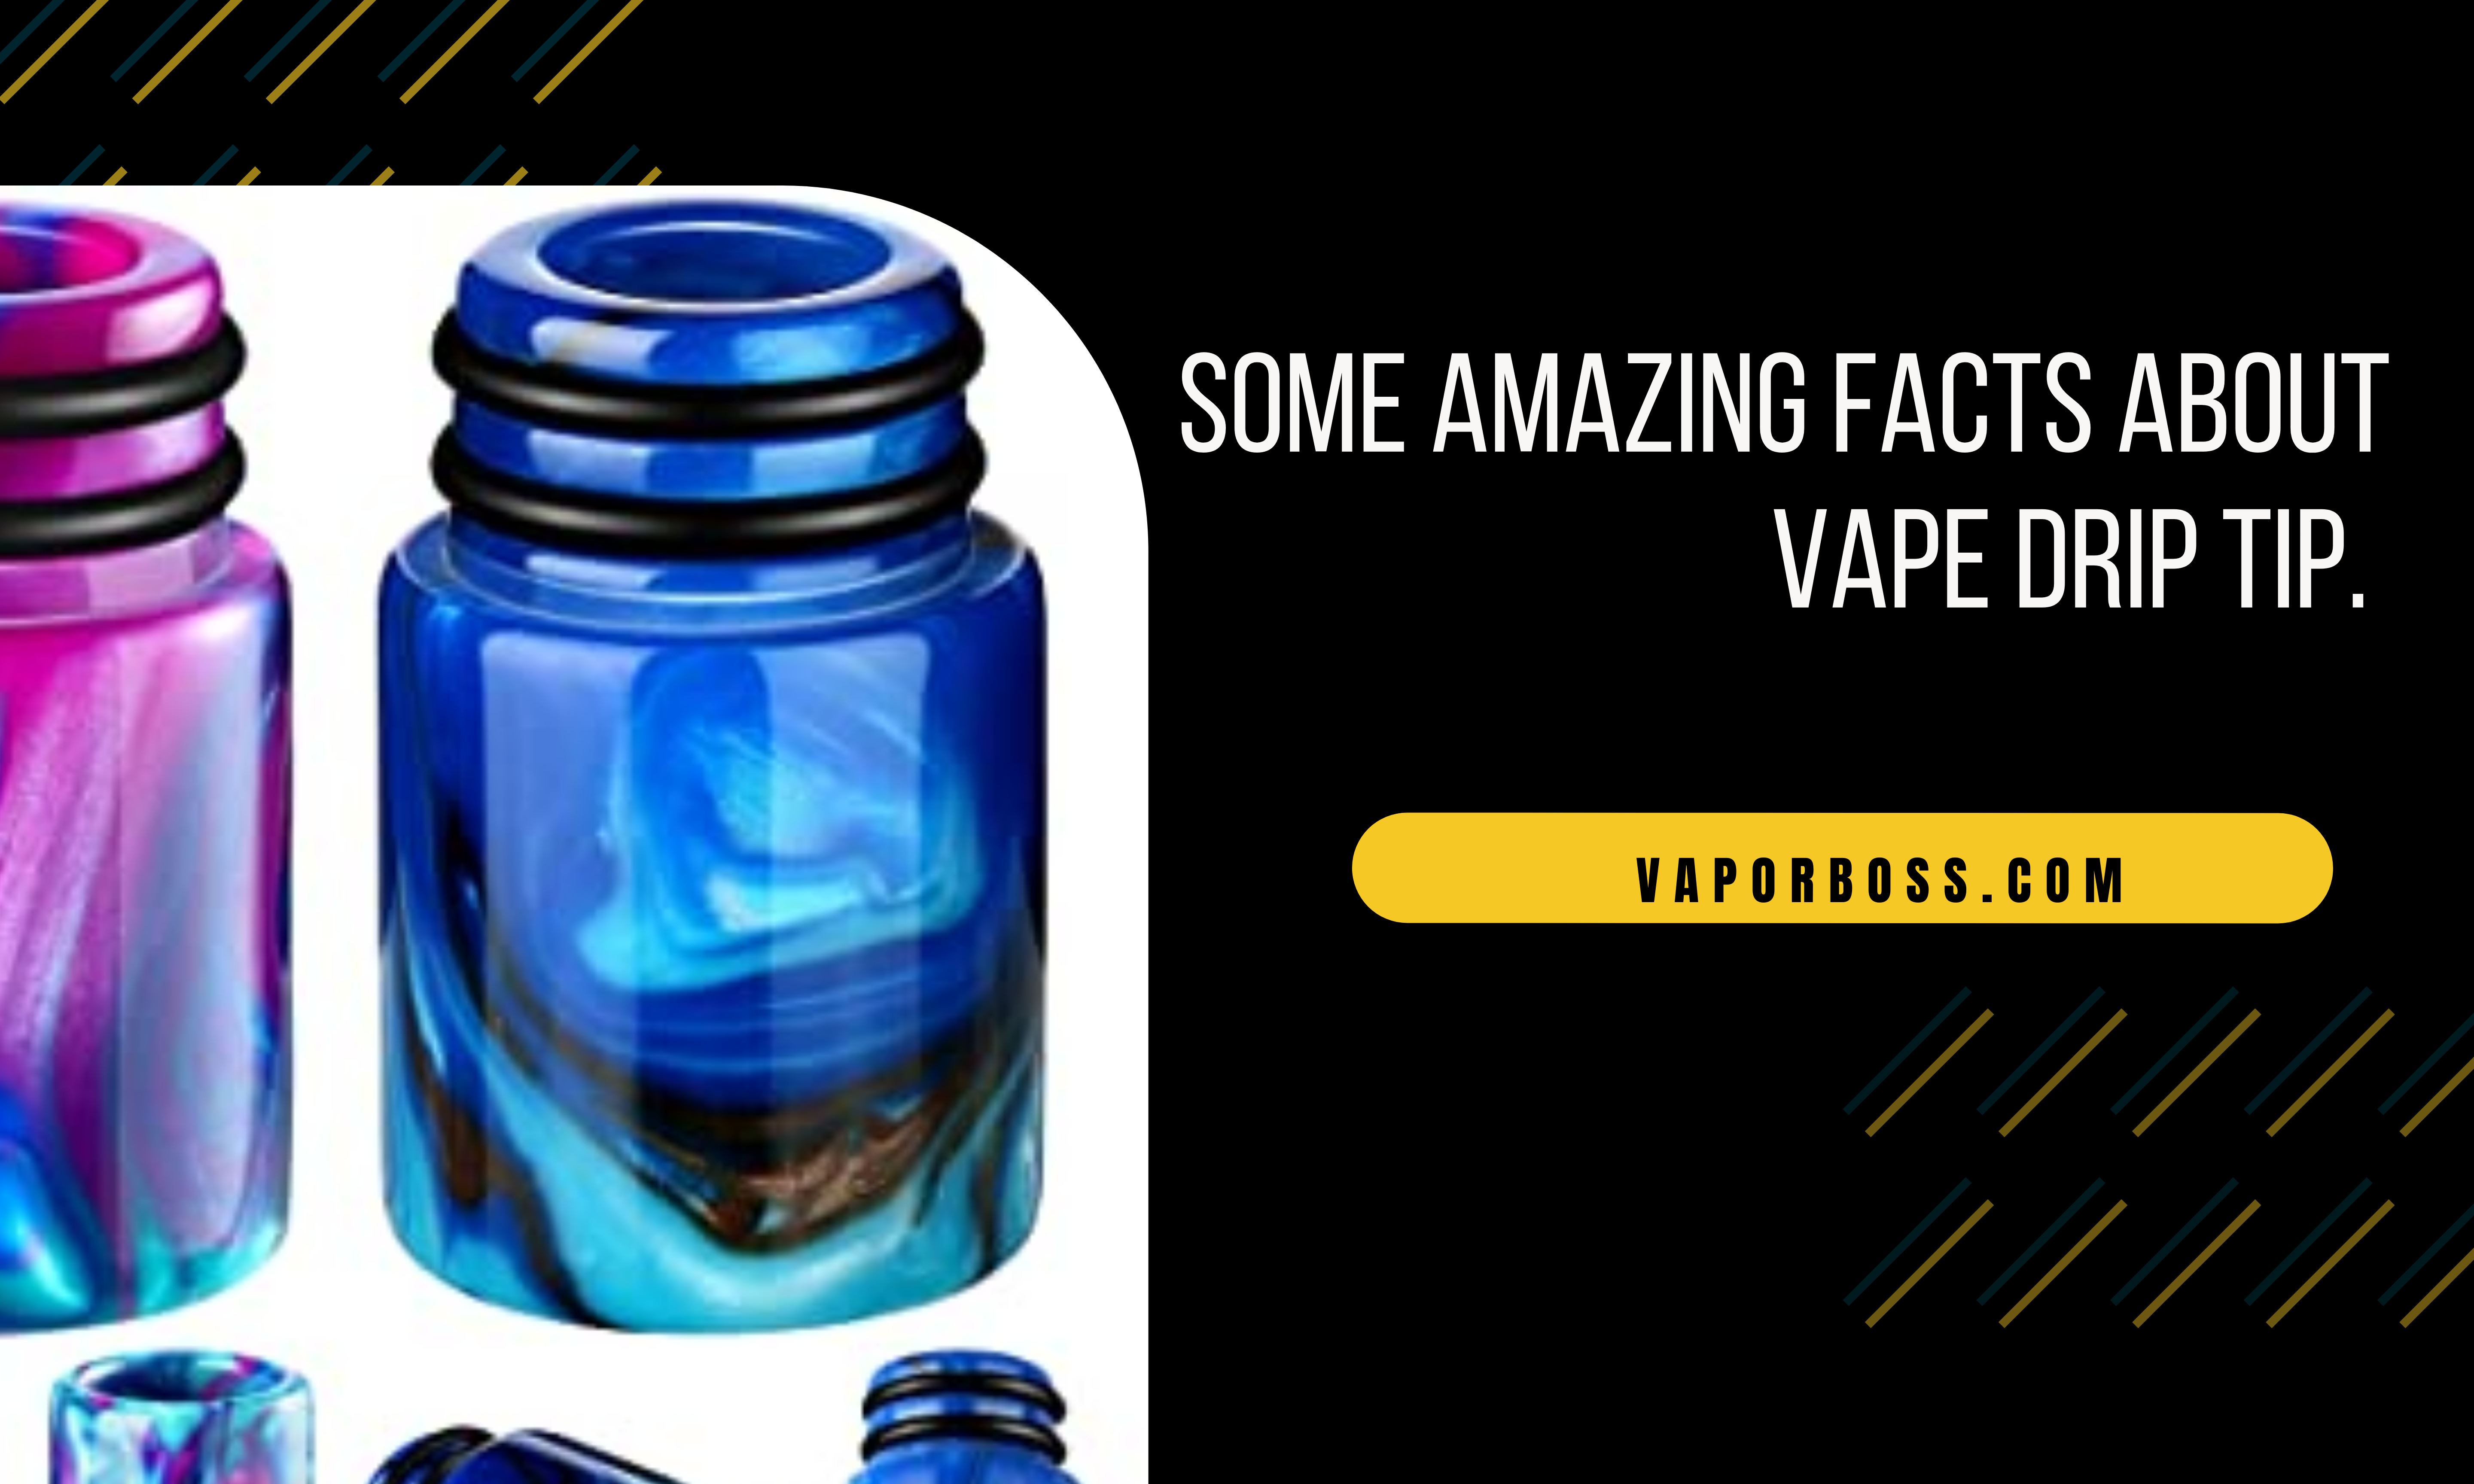 Some Amazing Facts About Vape Drip Tip | VaporBoss